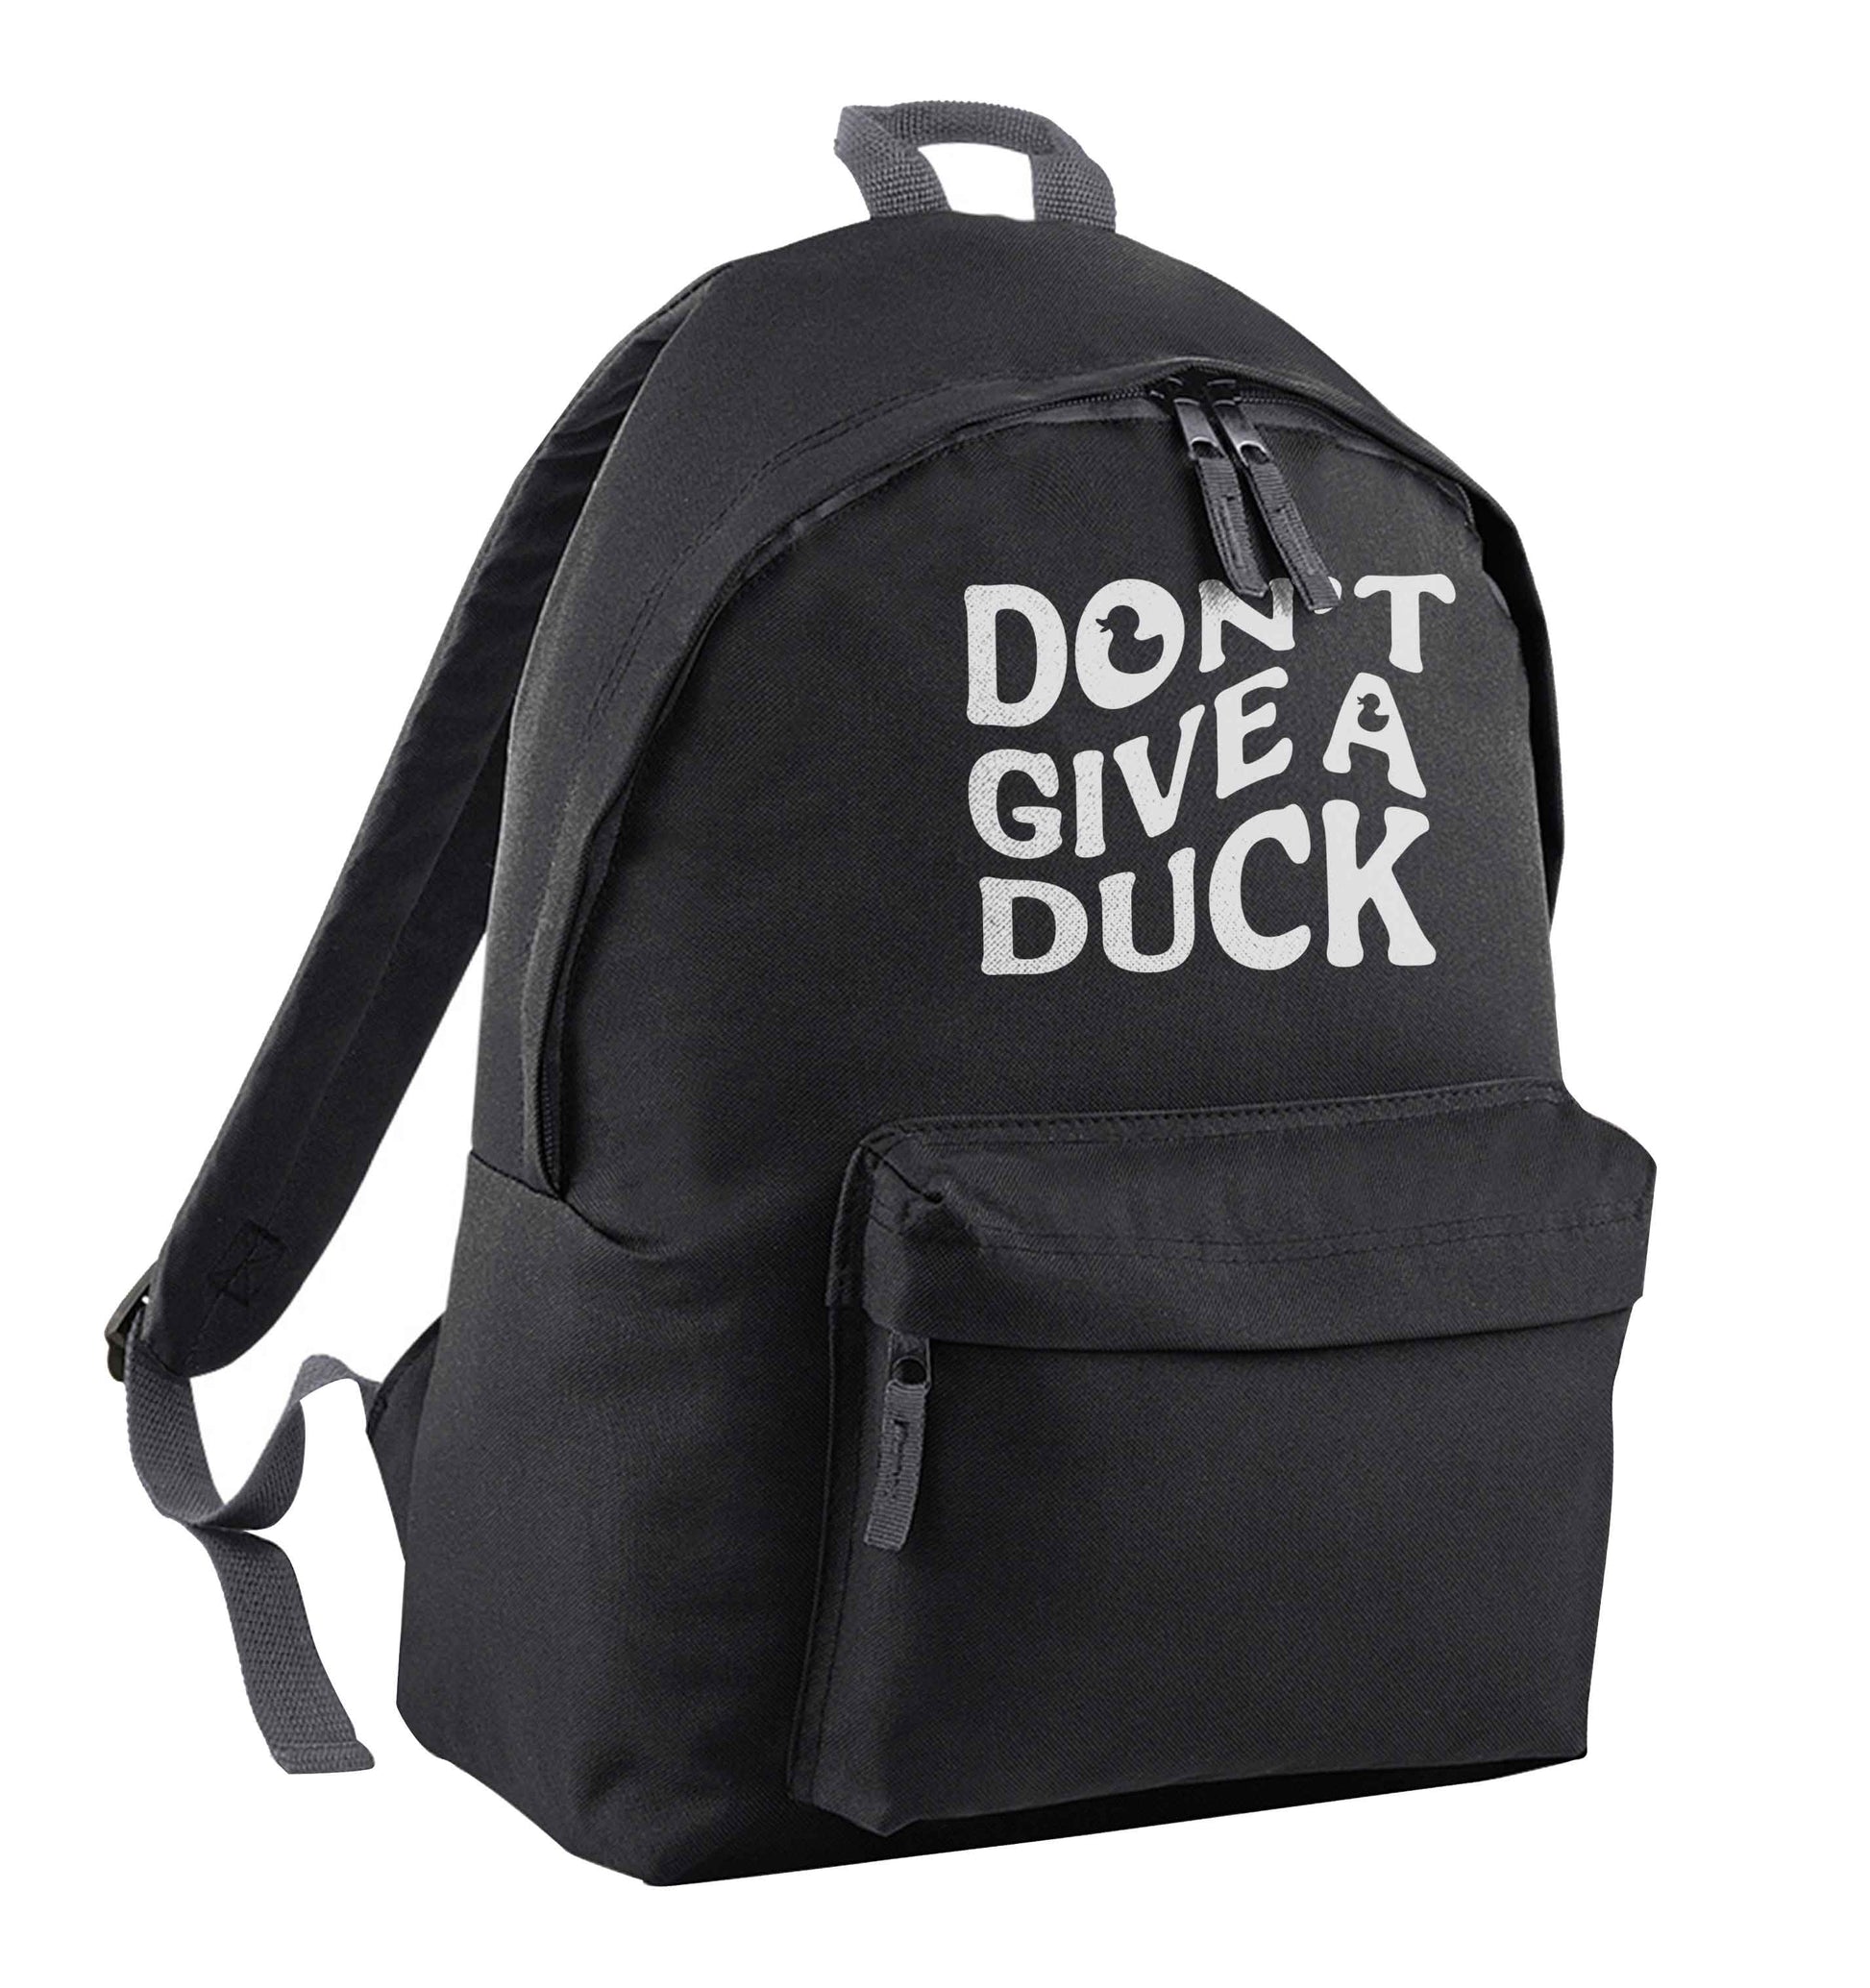 Don't give a duck black adults backpack